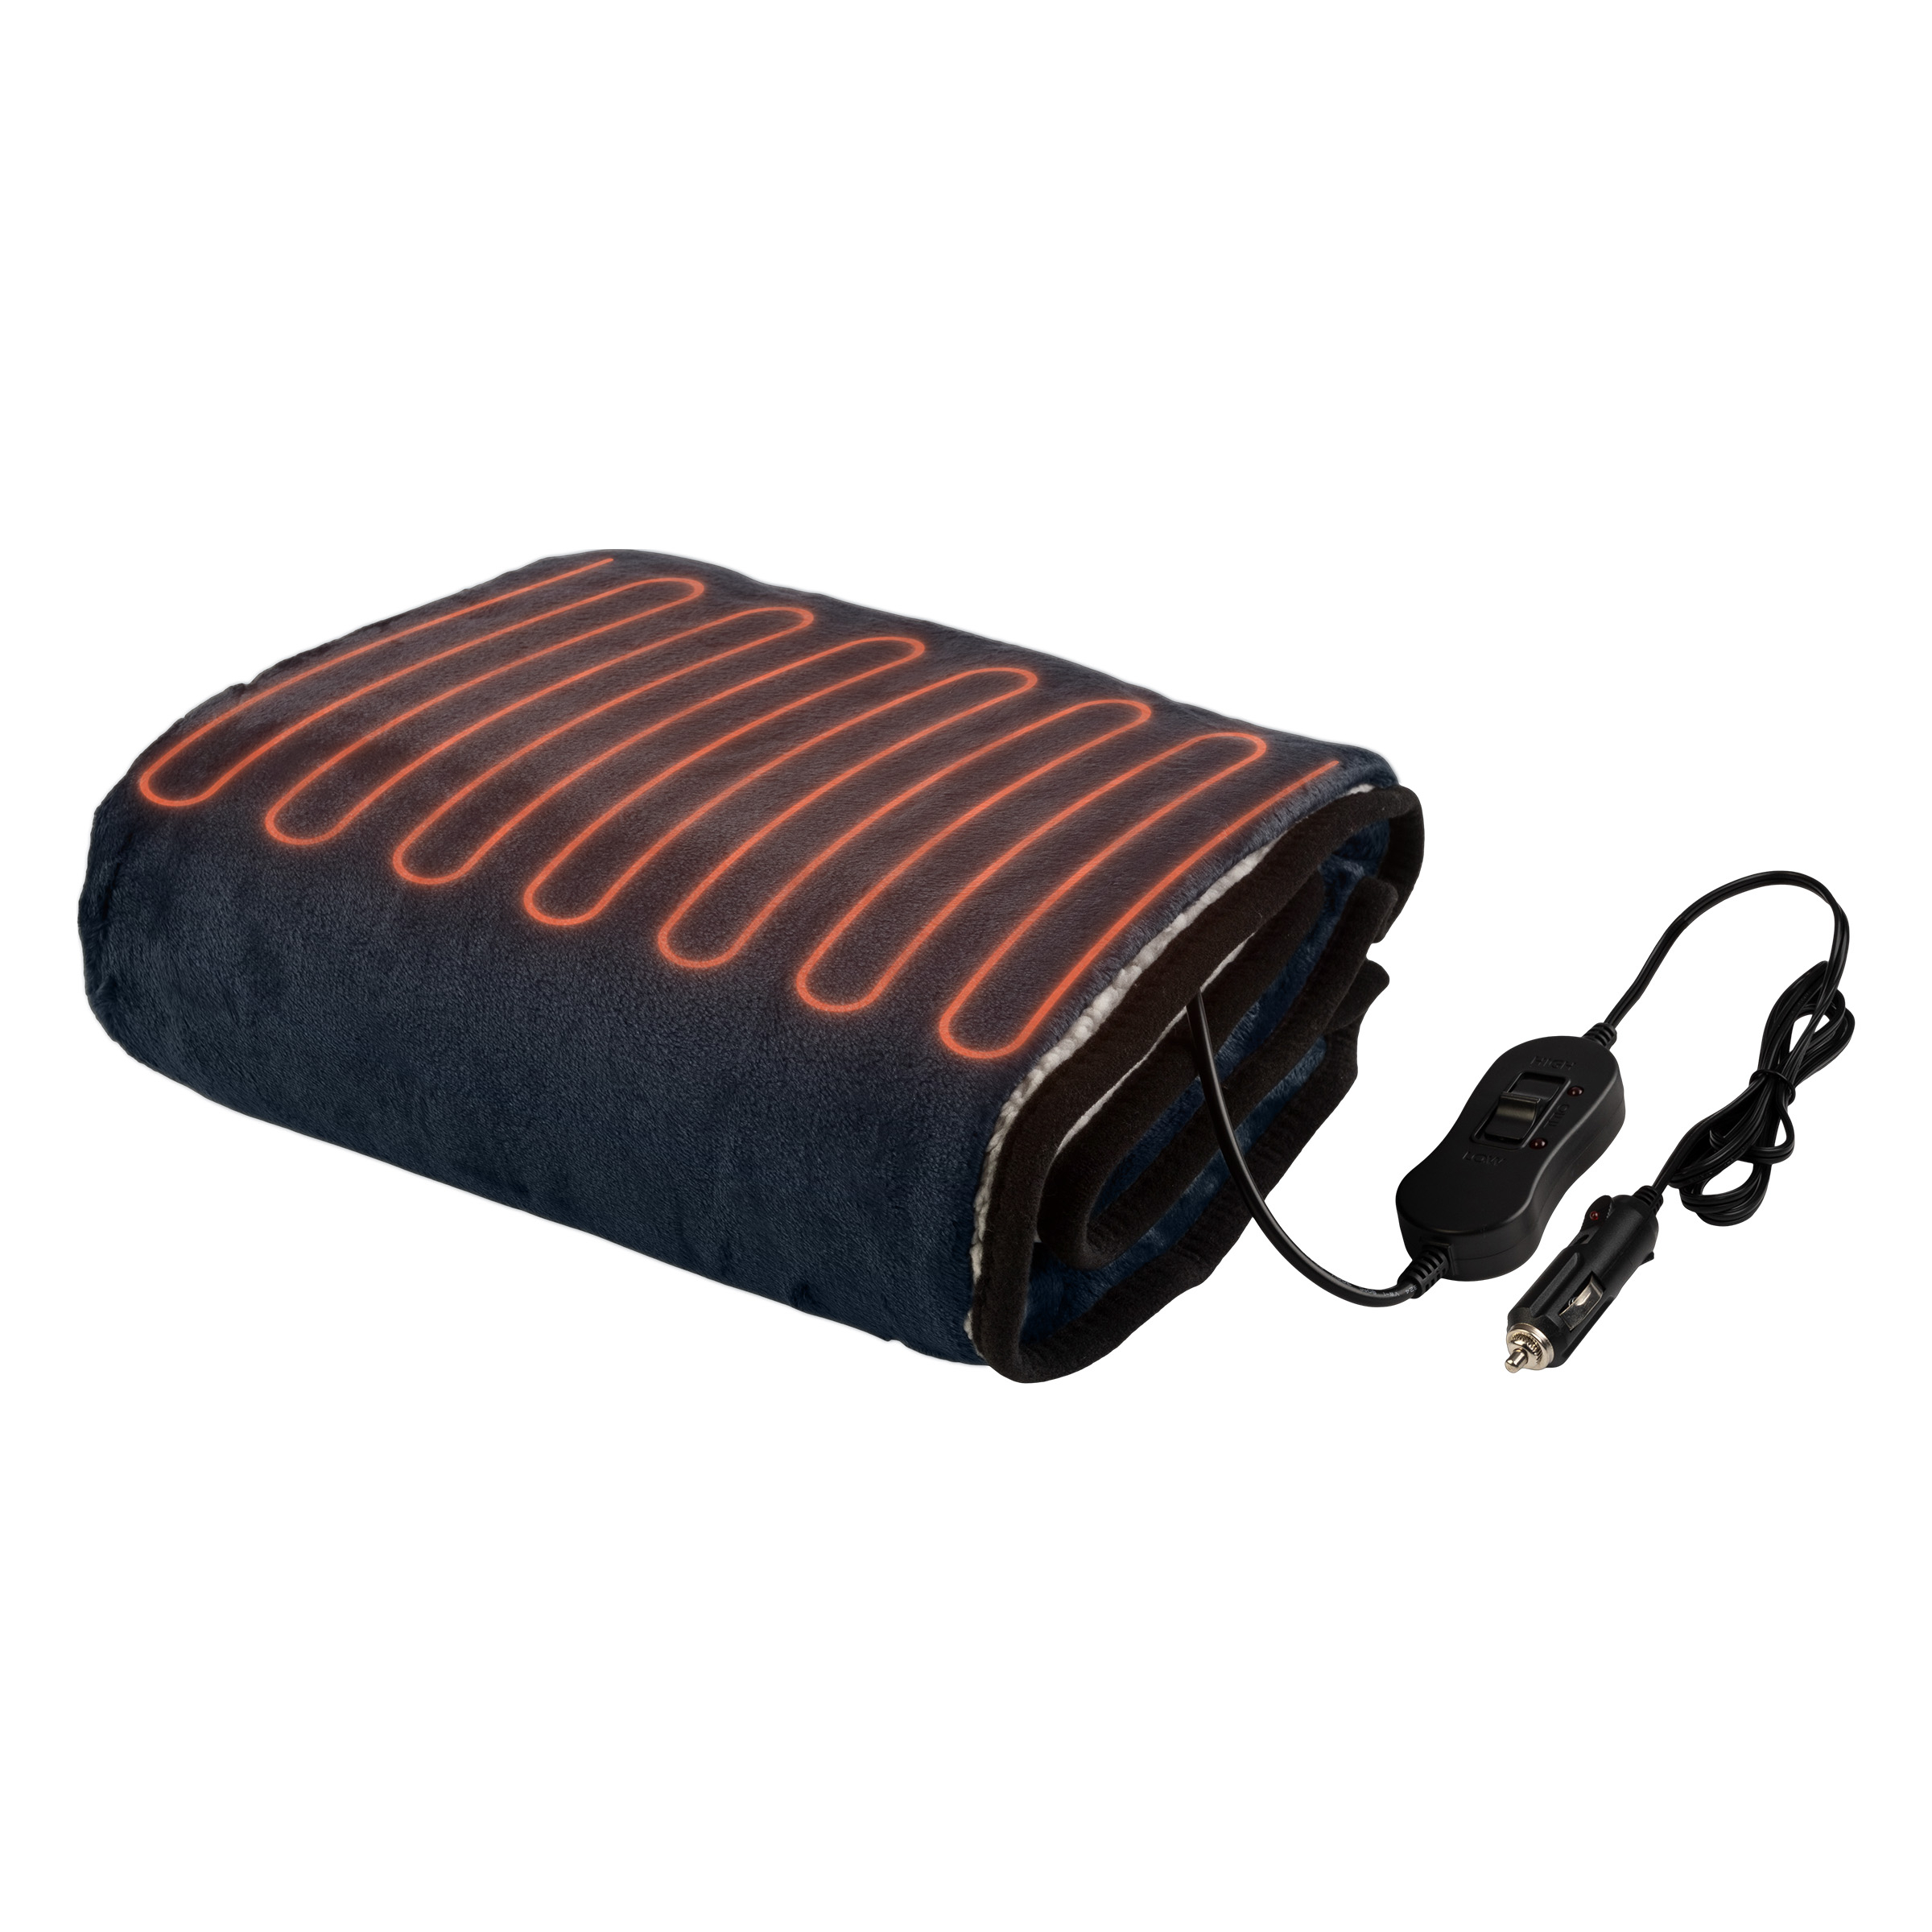 Heated Blanket Portable 12V Electric Travel Blanket For Car, Truck, Or RV - Navy Blue